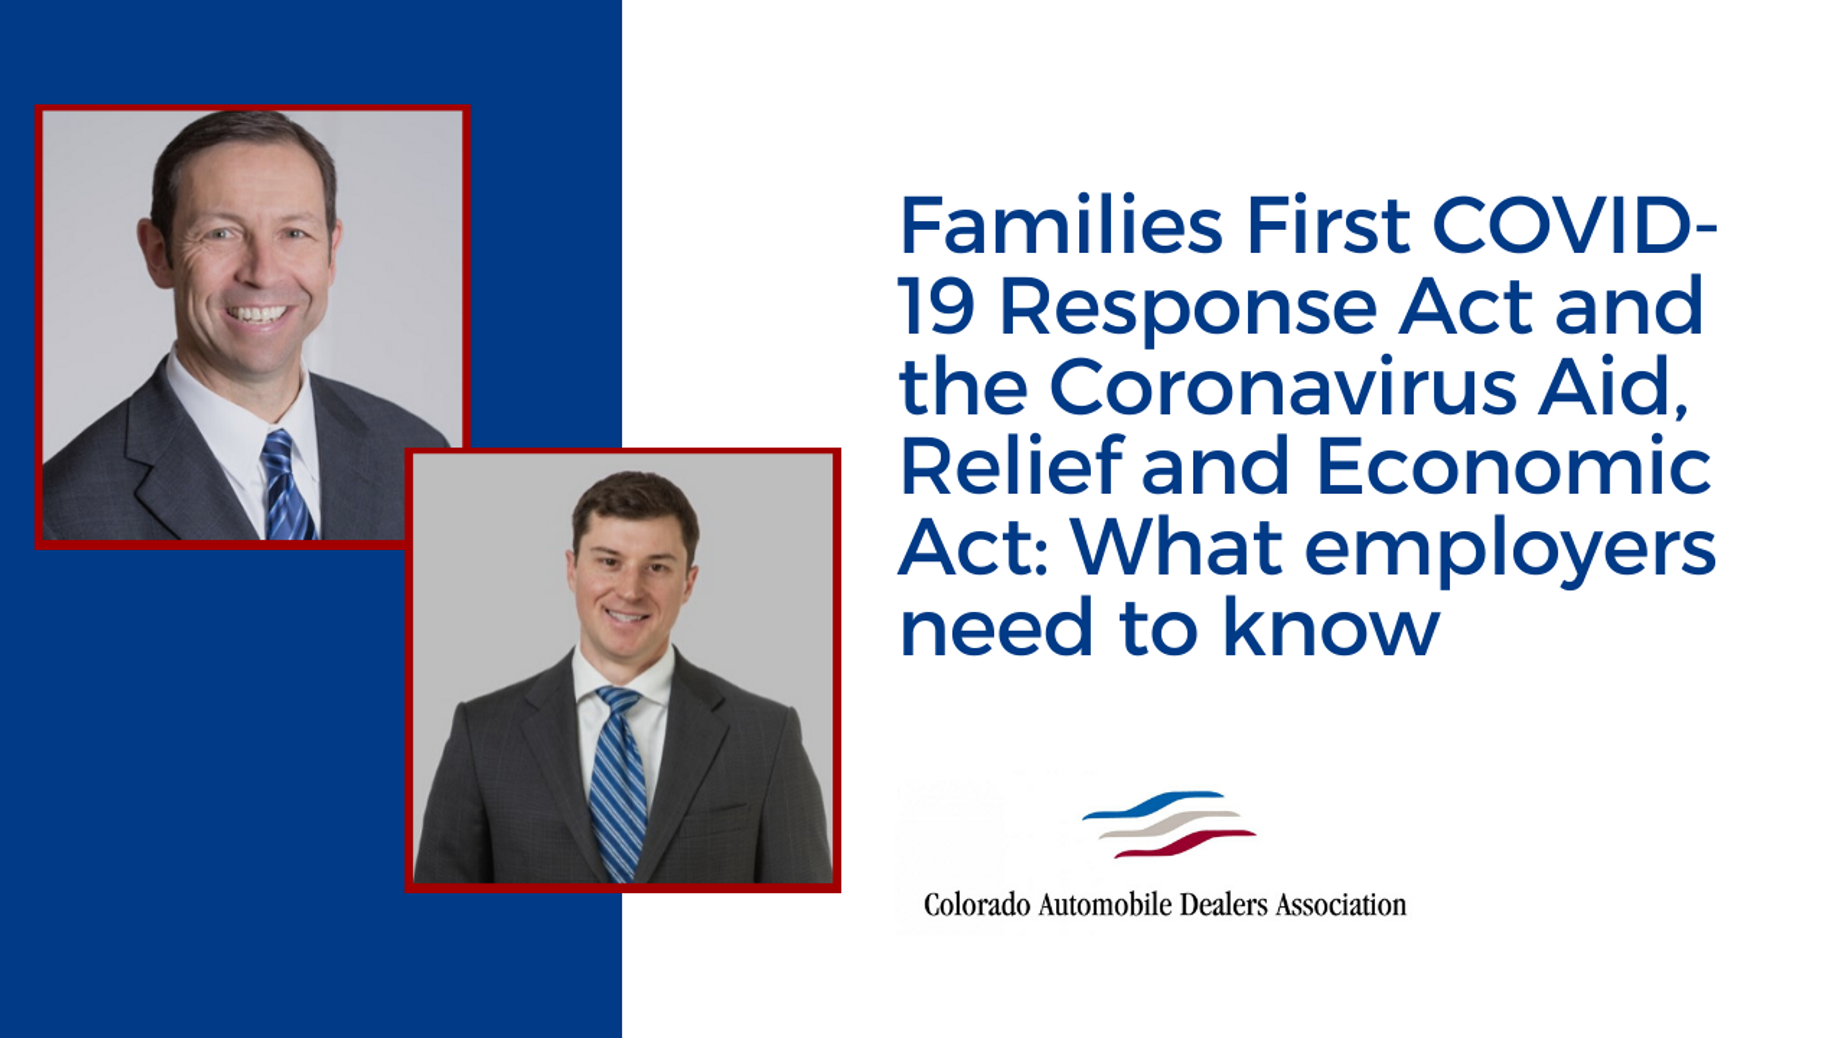 Families First COVID-19 Response Act and the Coronavirus Aid, Relief and Economic Act: What employers need to know